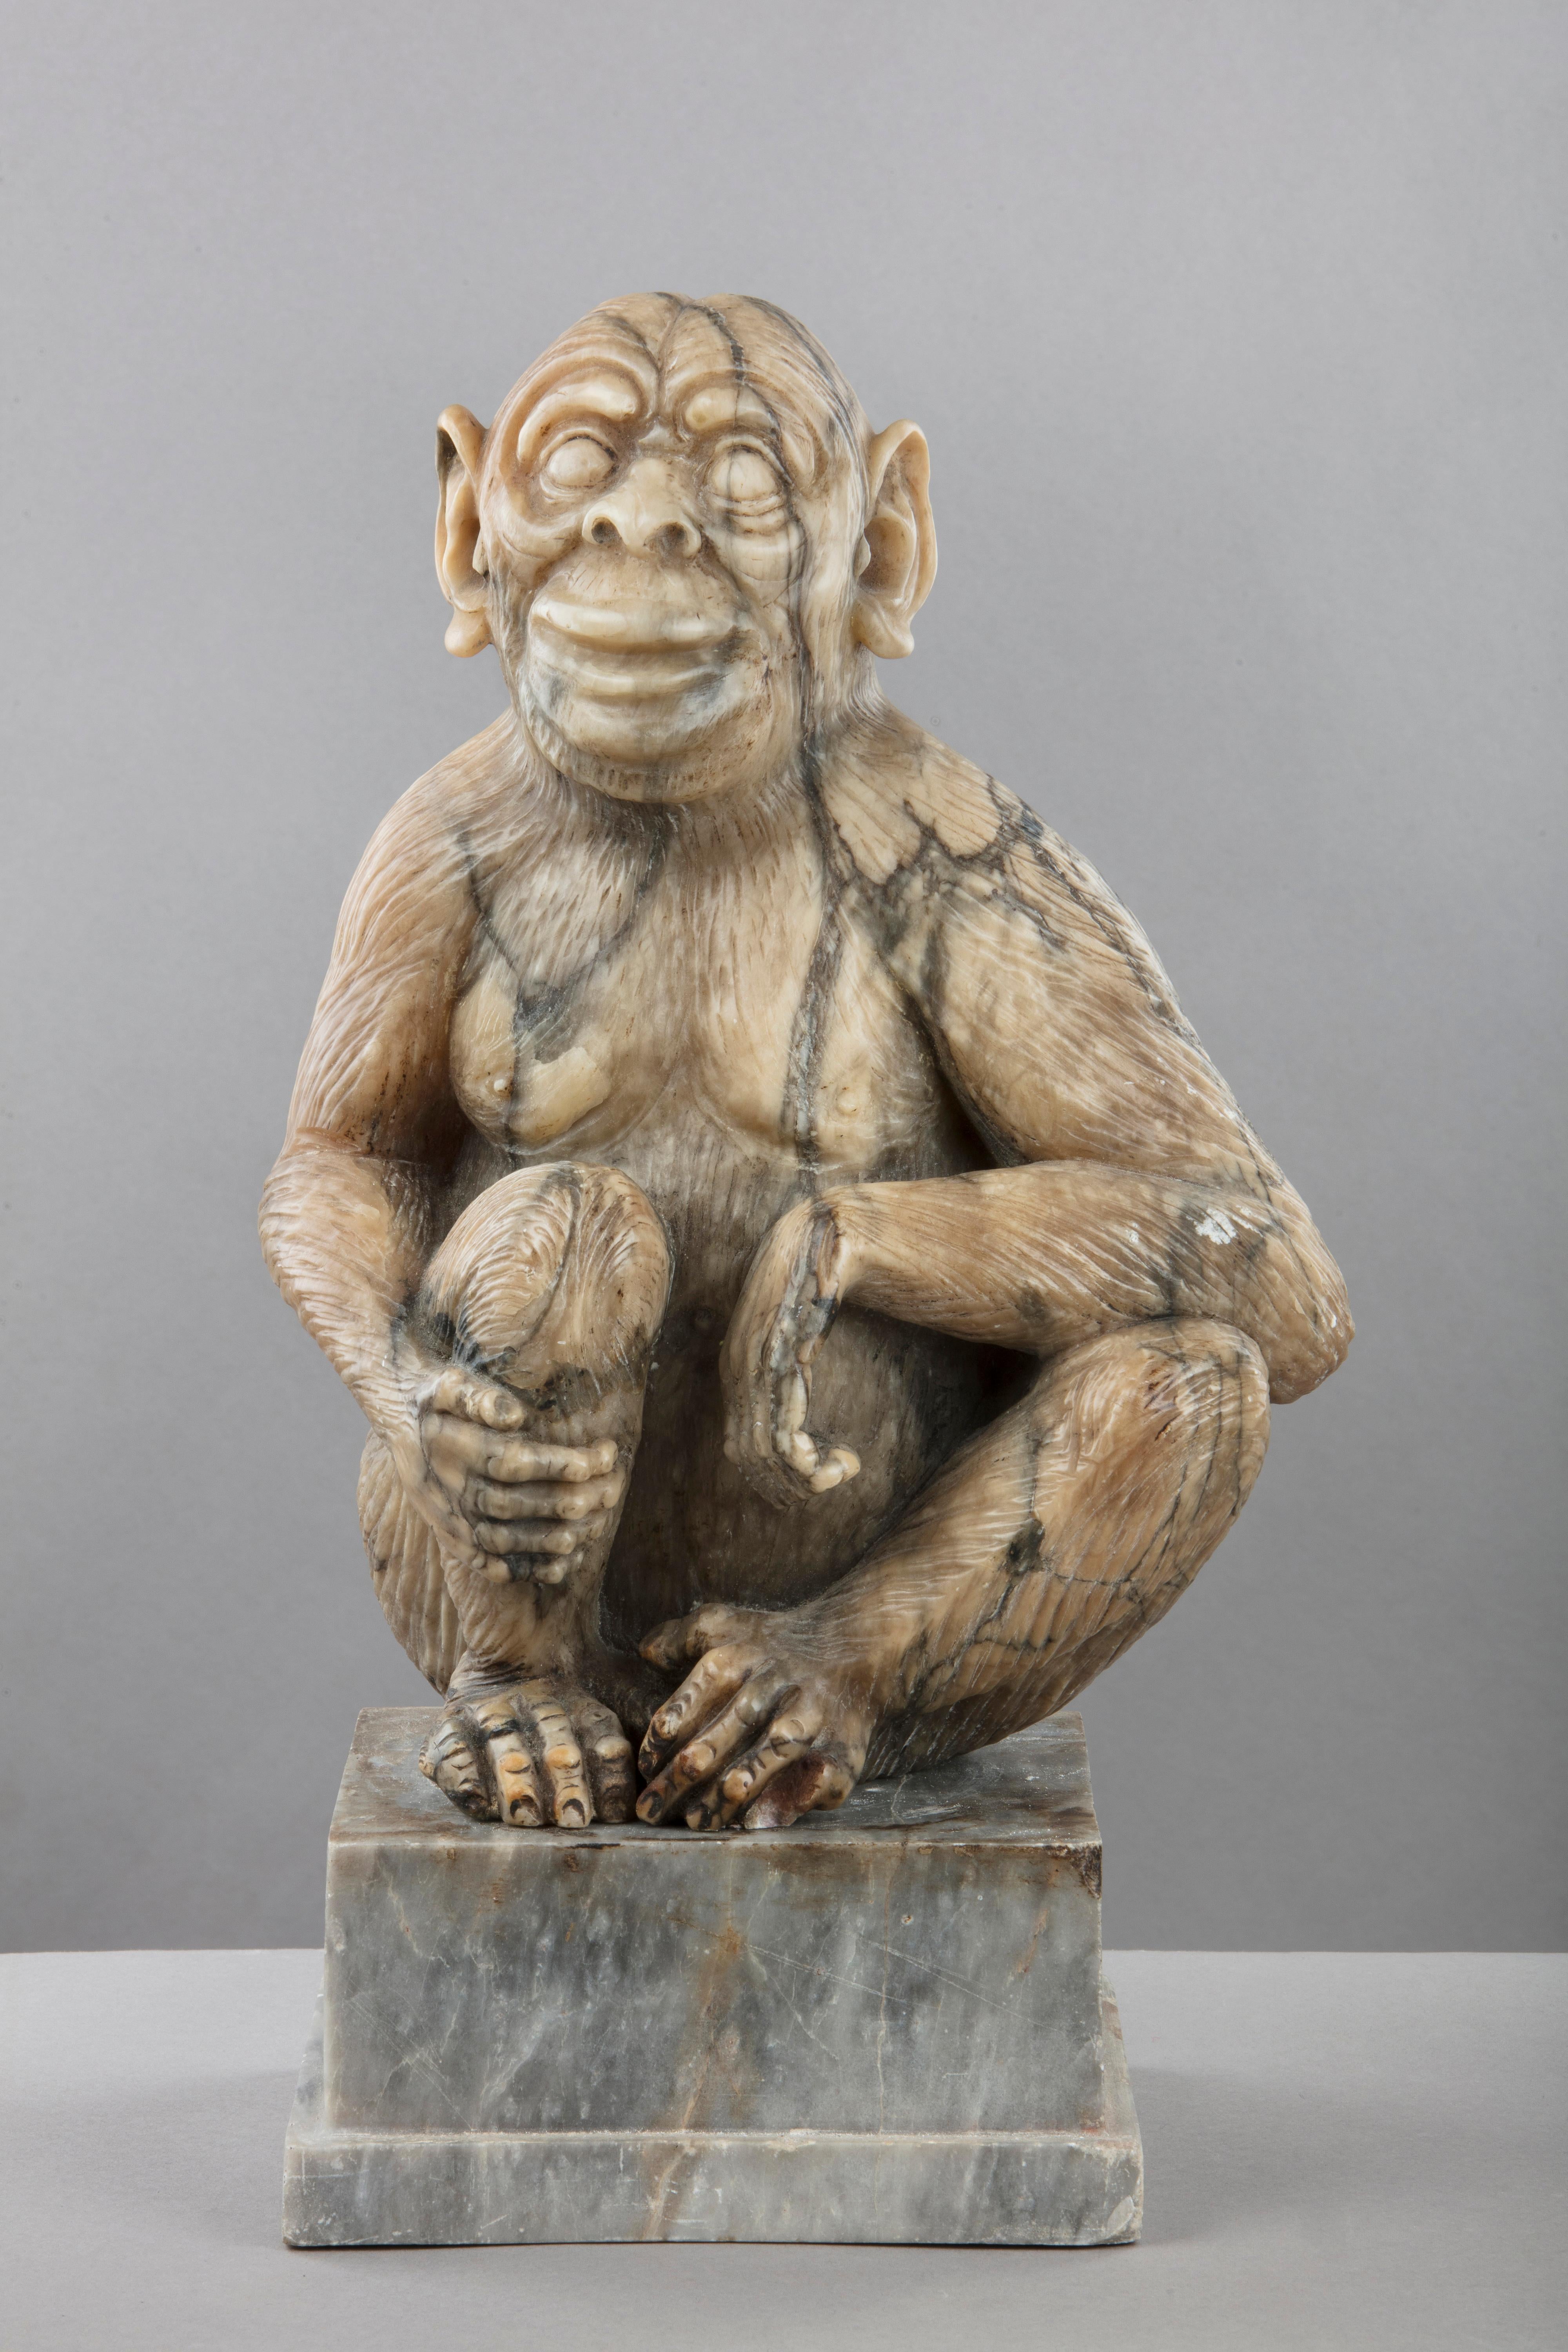 Alabaster figure of a monkey, Germany, 19th century.